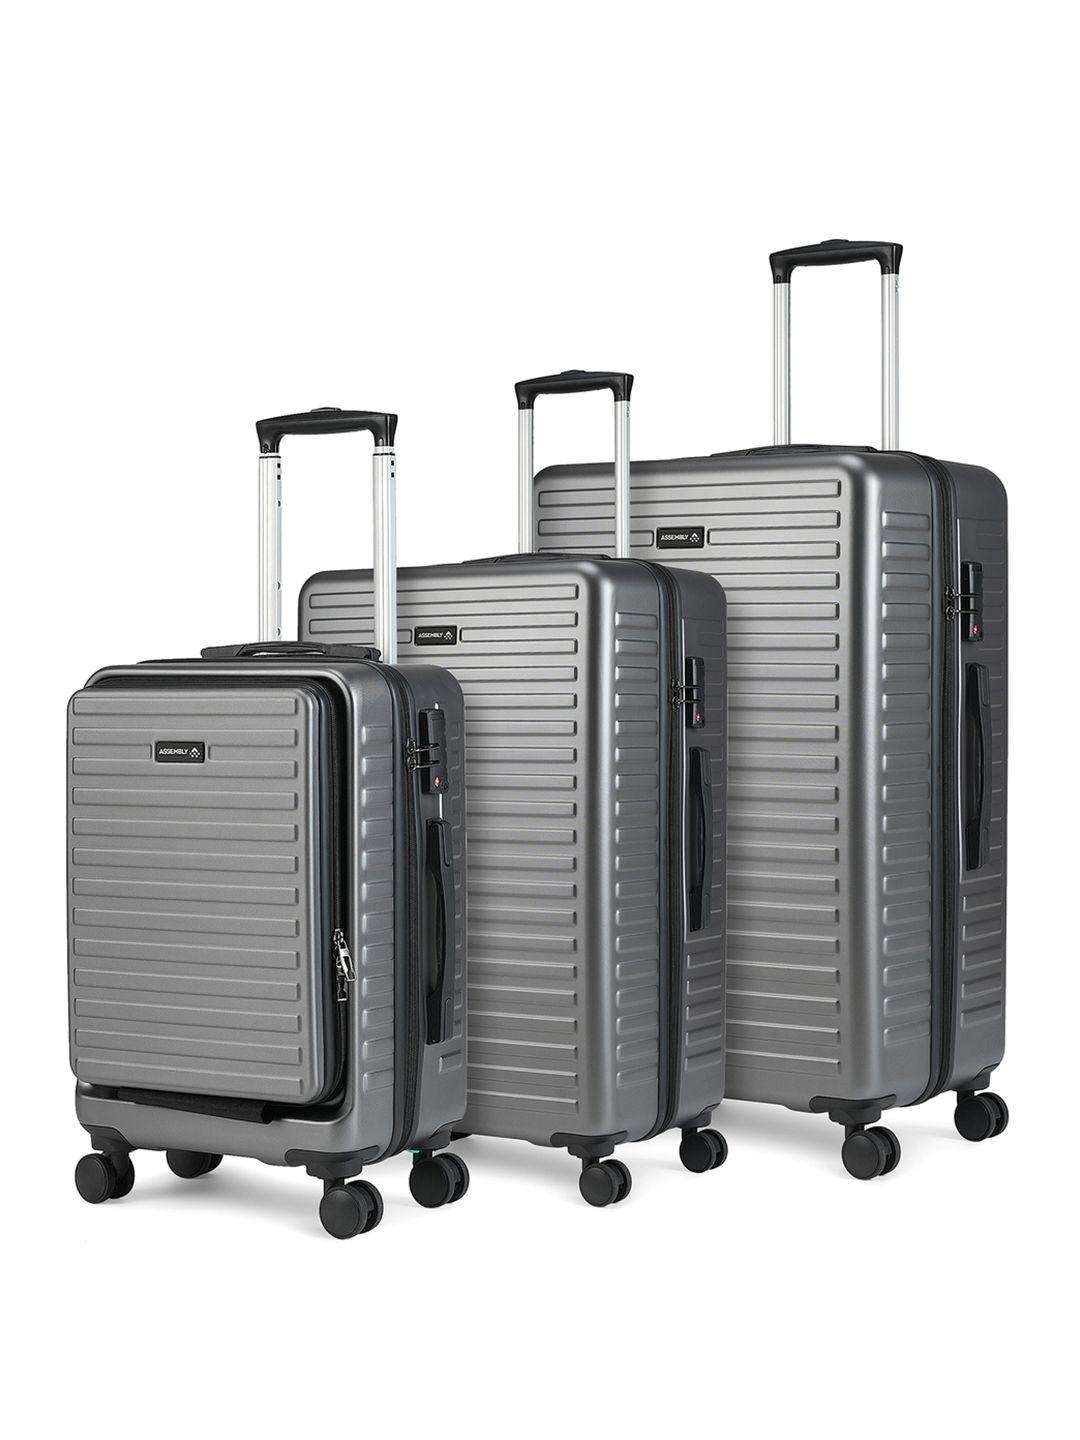 assembly set of 3 textured 360 degree rotation hard-sided trolley bags 42l, 67l & 94l